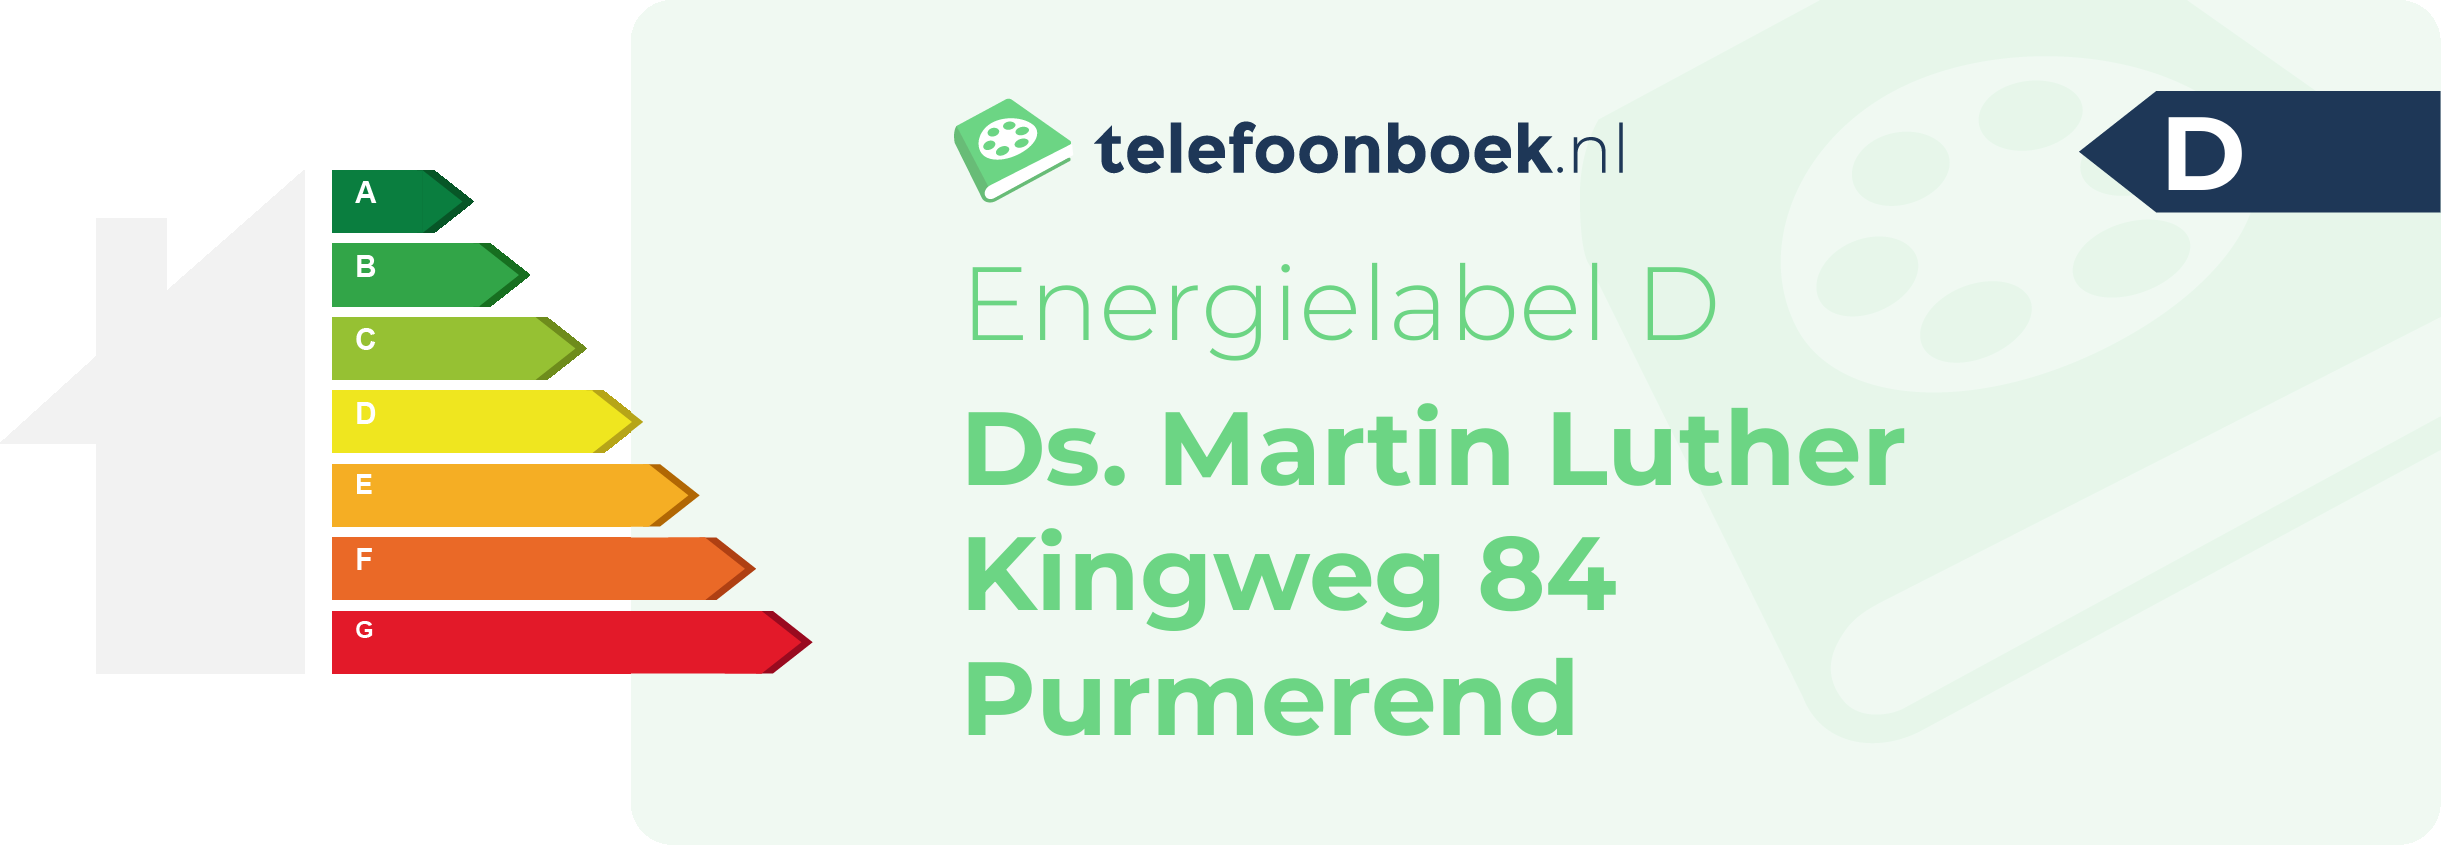 Energielabel Ds. Martin Luther Kingweg 84 Purmerend